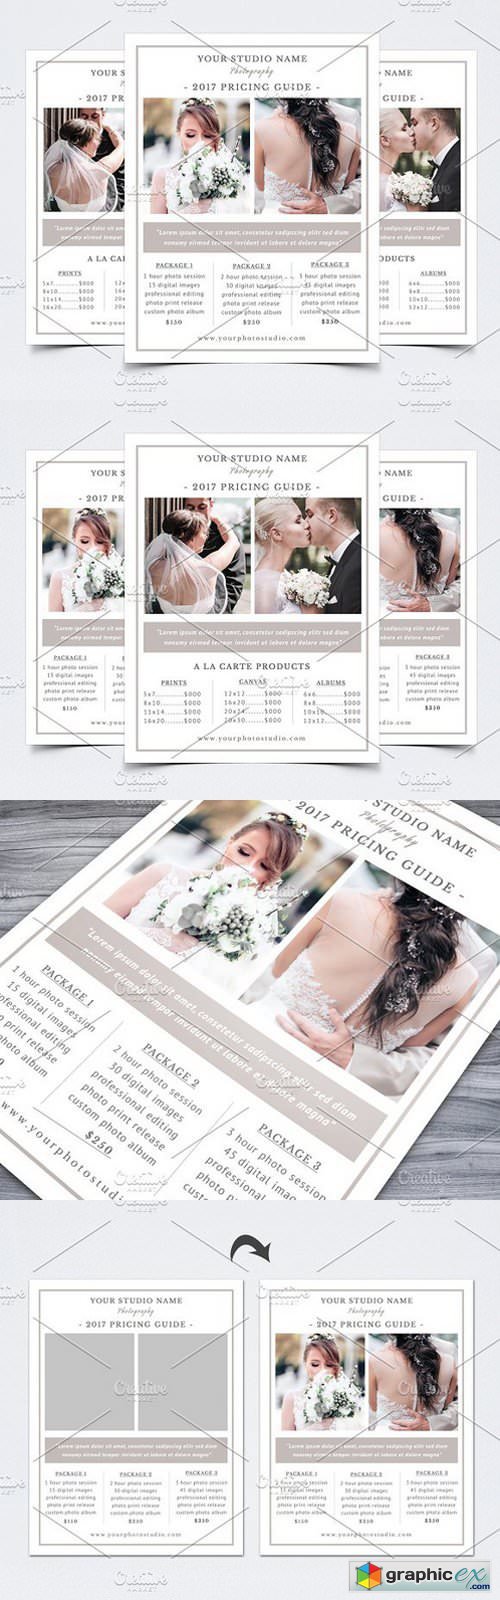 Photography Pricing Guide Template 1626478